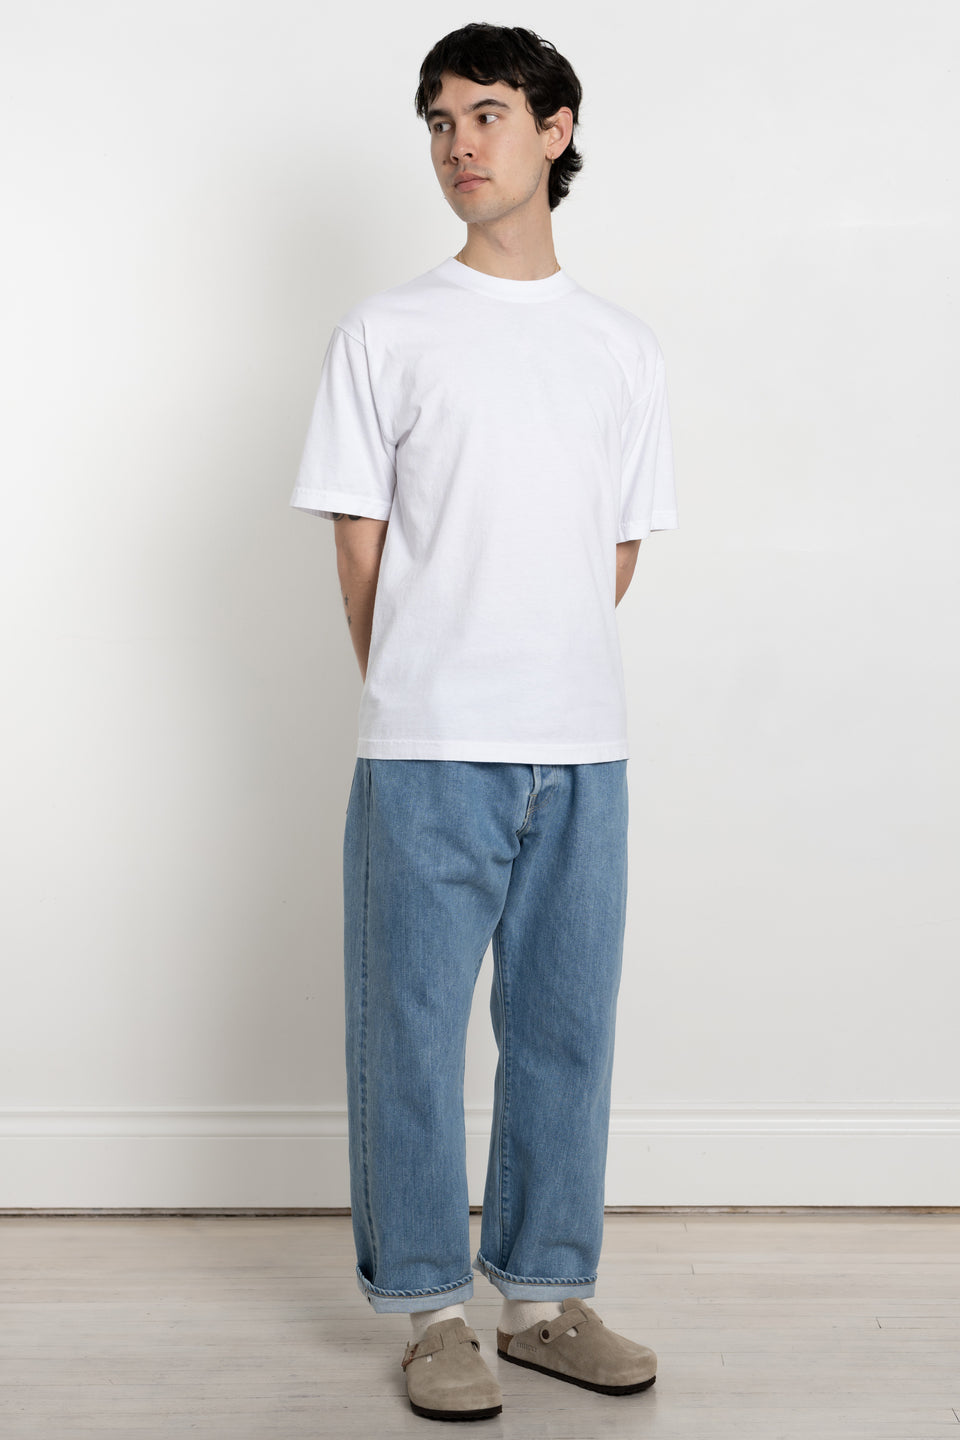 Garment Dyed US Cotton Tee White Men's Made in USA Calculus Online